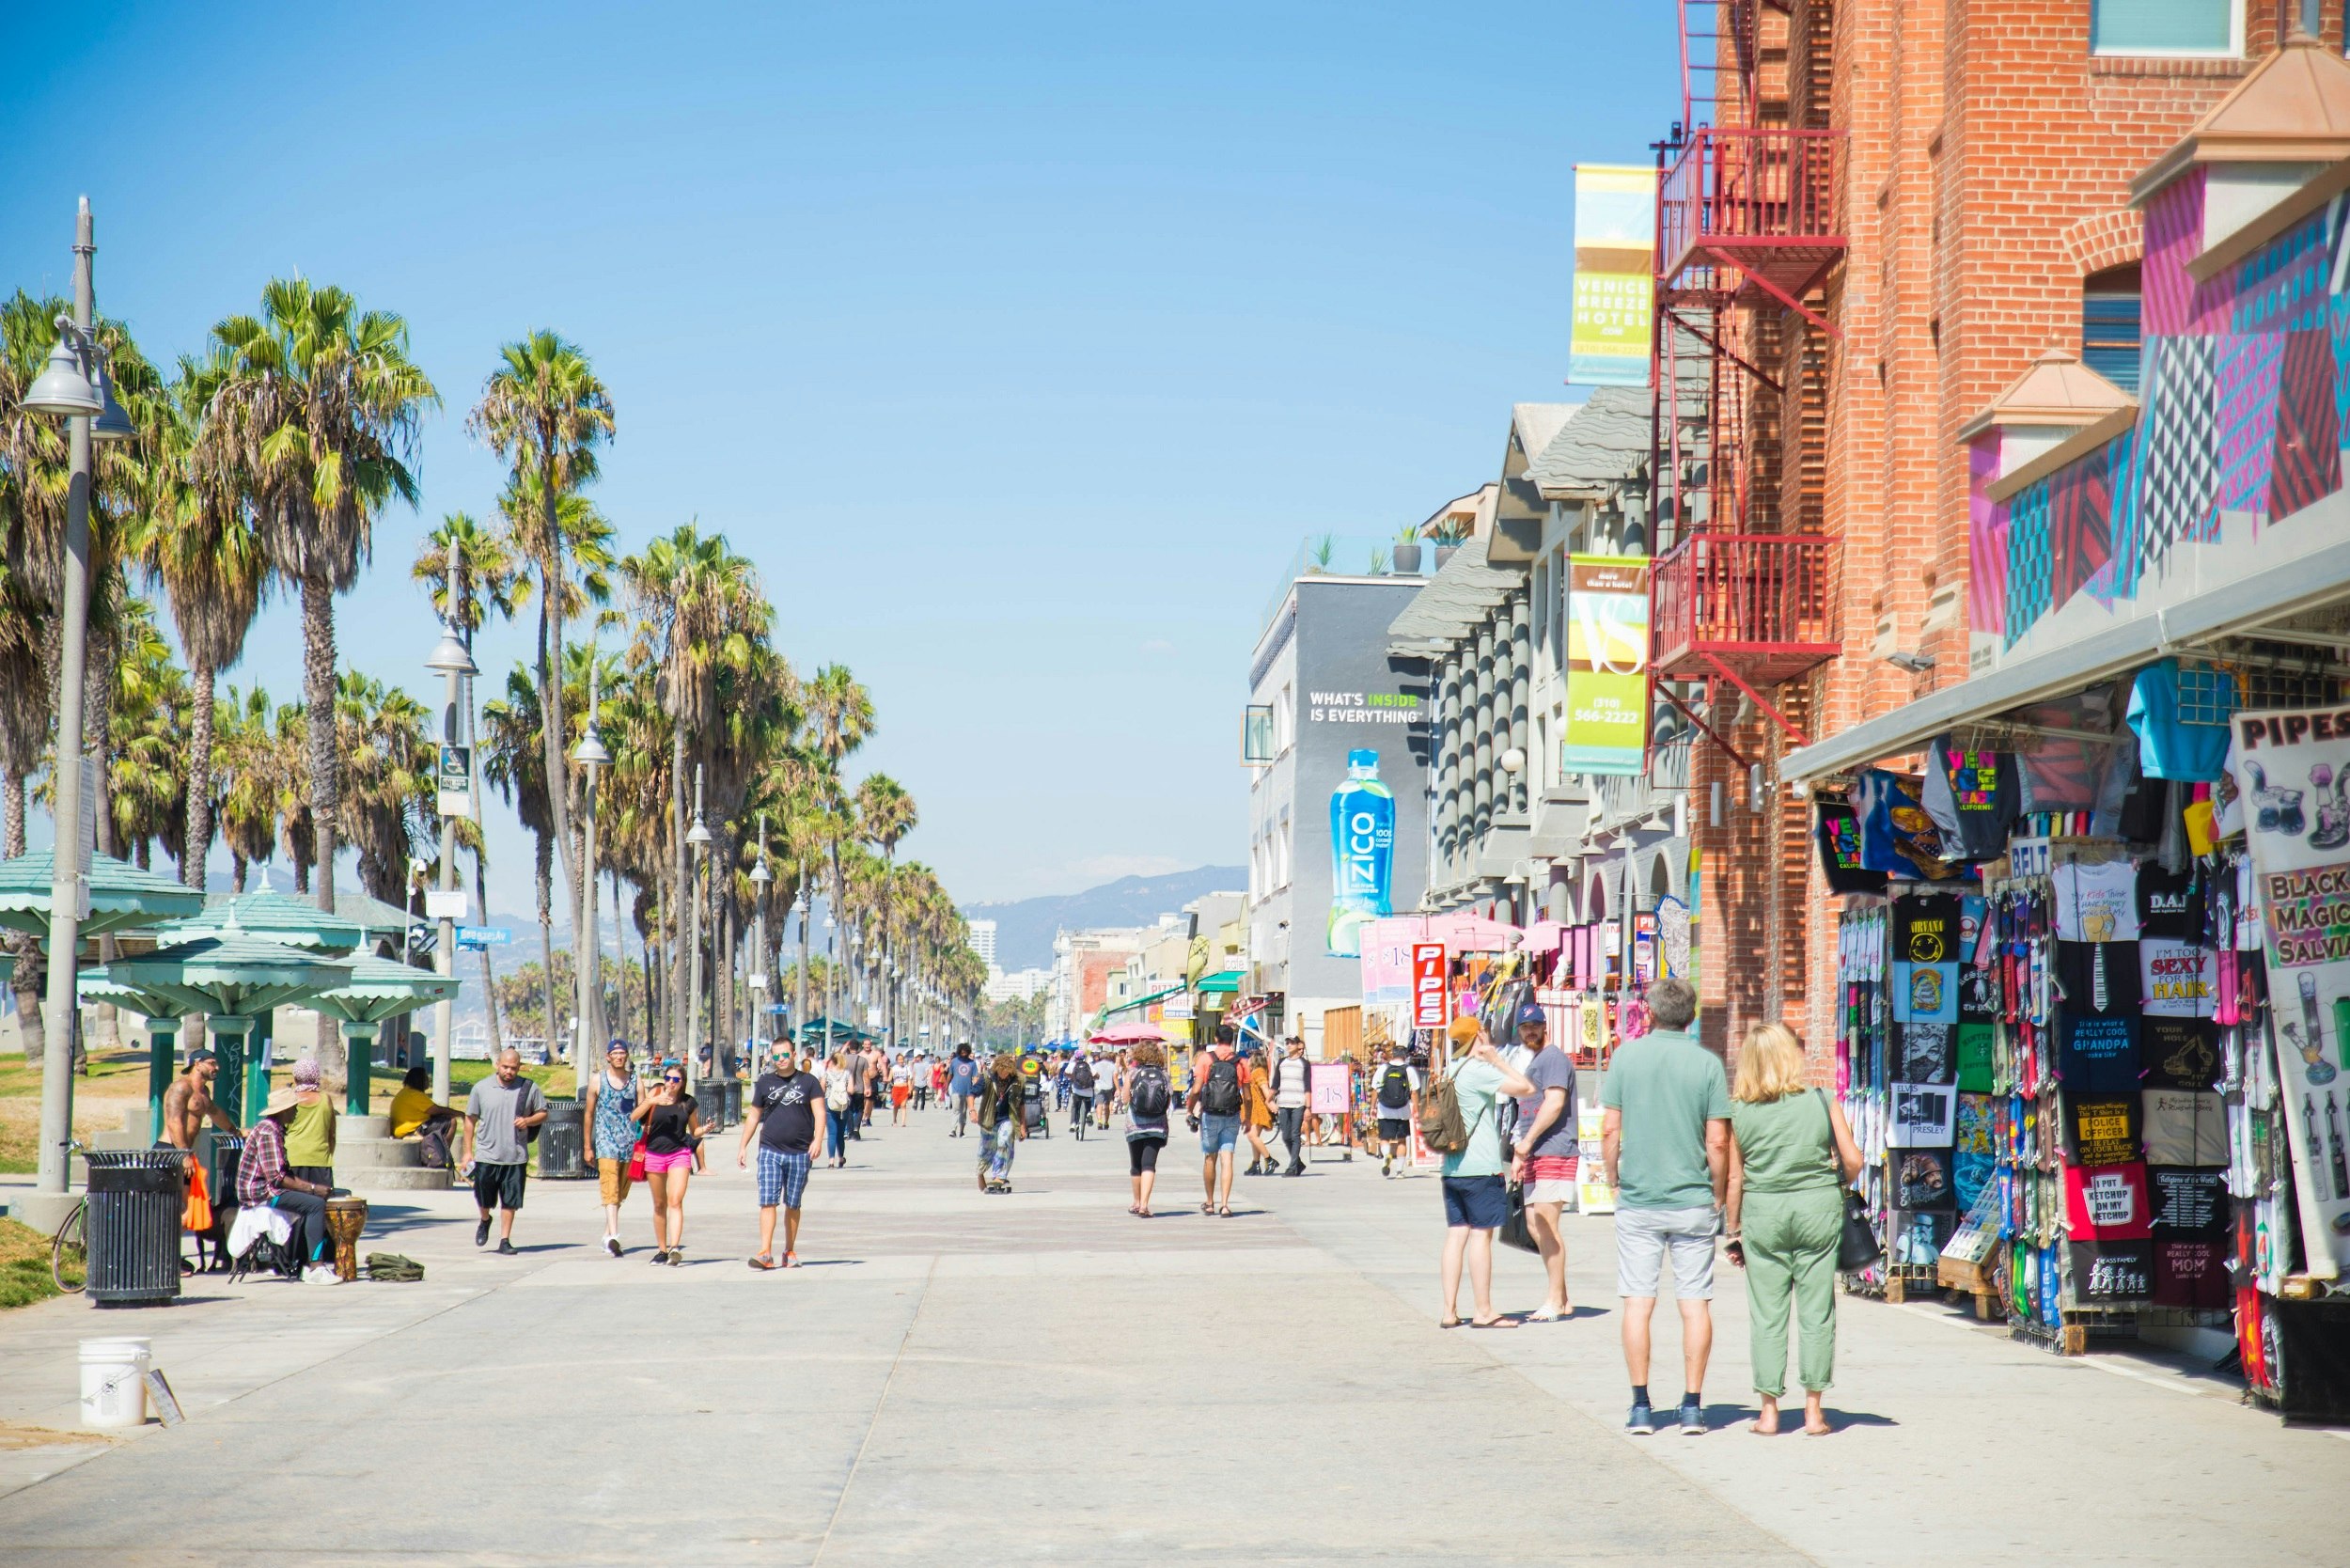 The Venice Boardwalk extends into the distance, with palm trees lining the beach side and vendors and shops lining the other; crowds walk along.